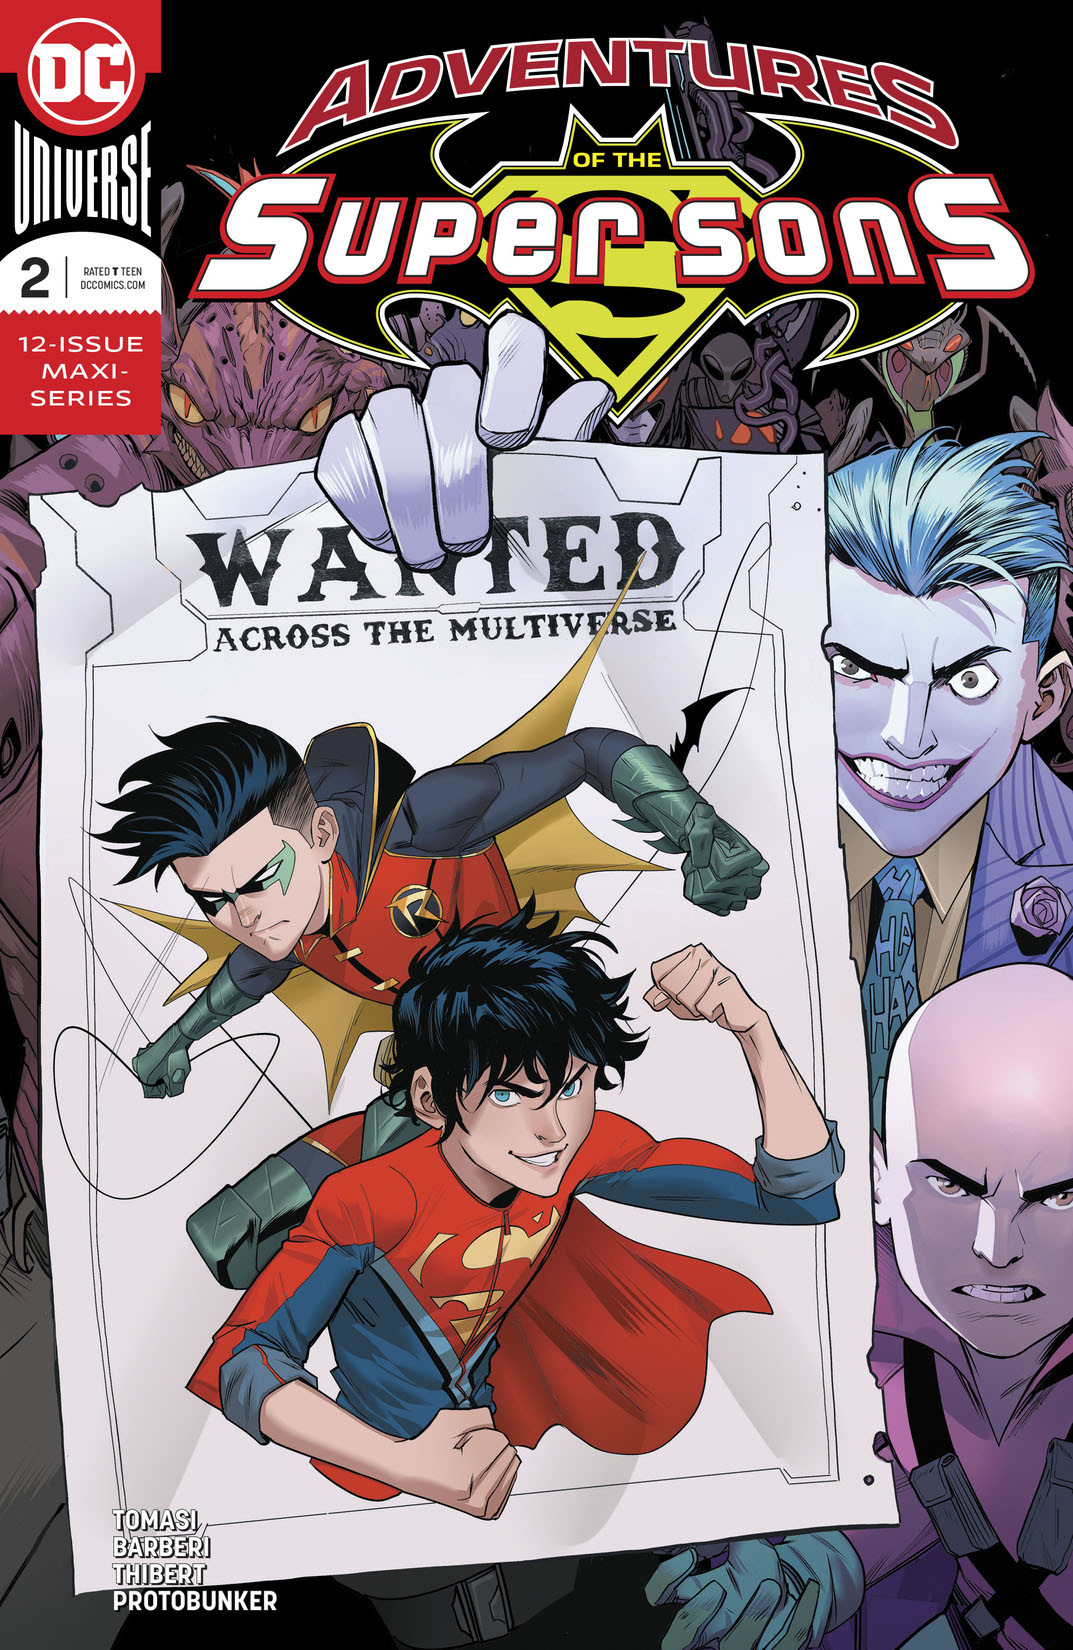 Adventures of the Super Sons #2 preview images